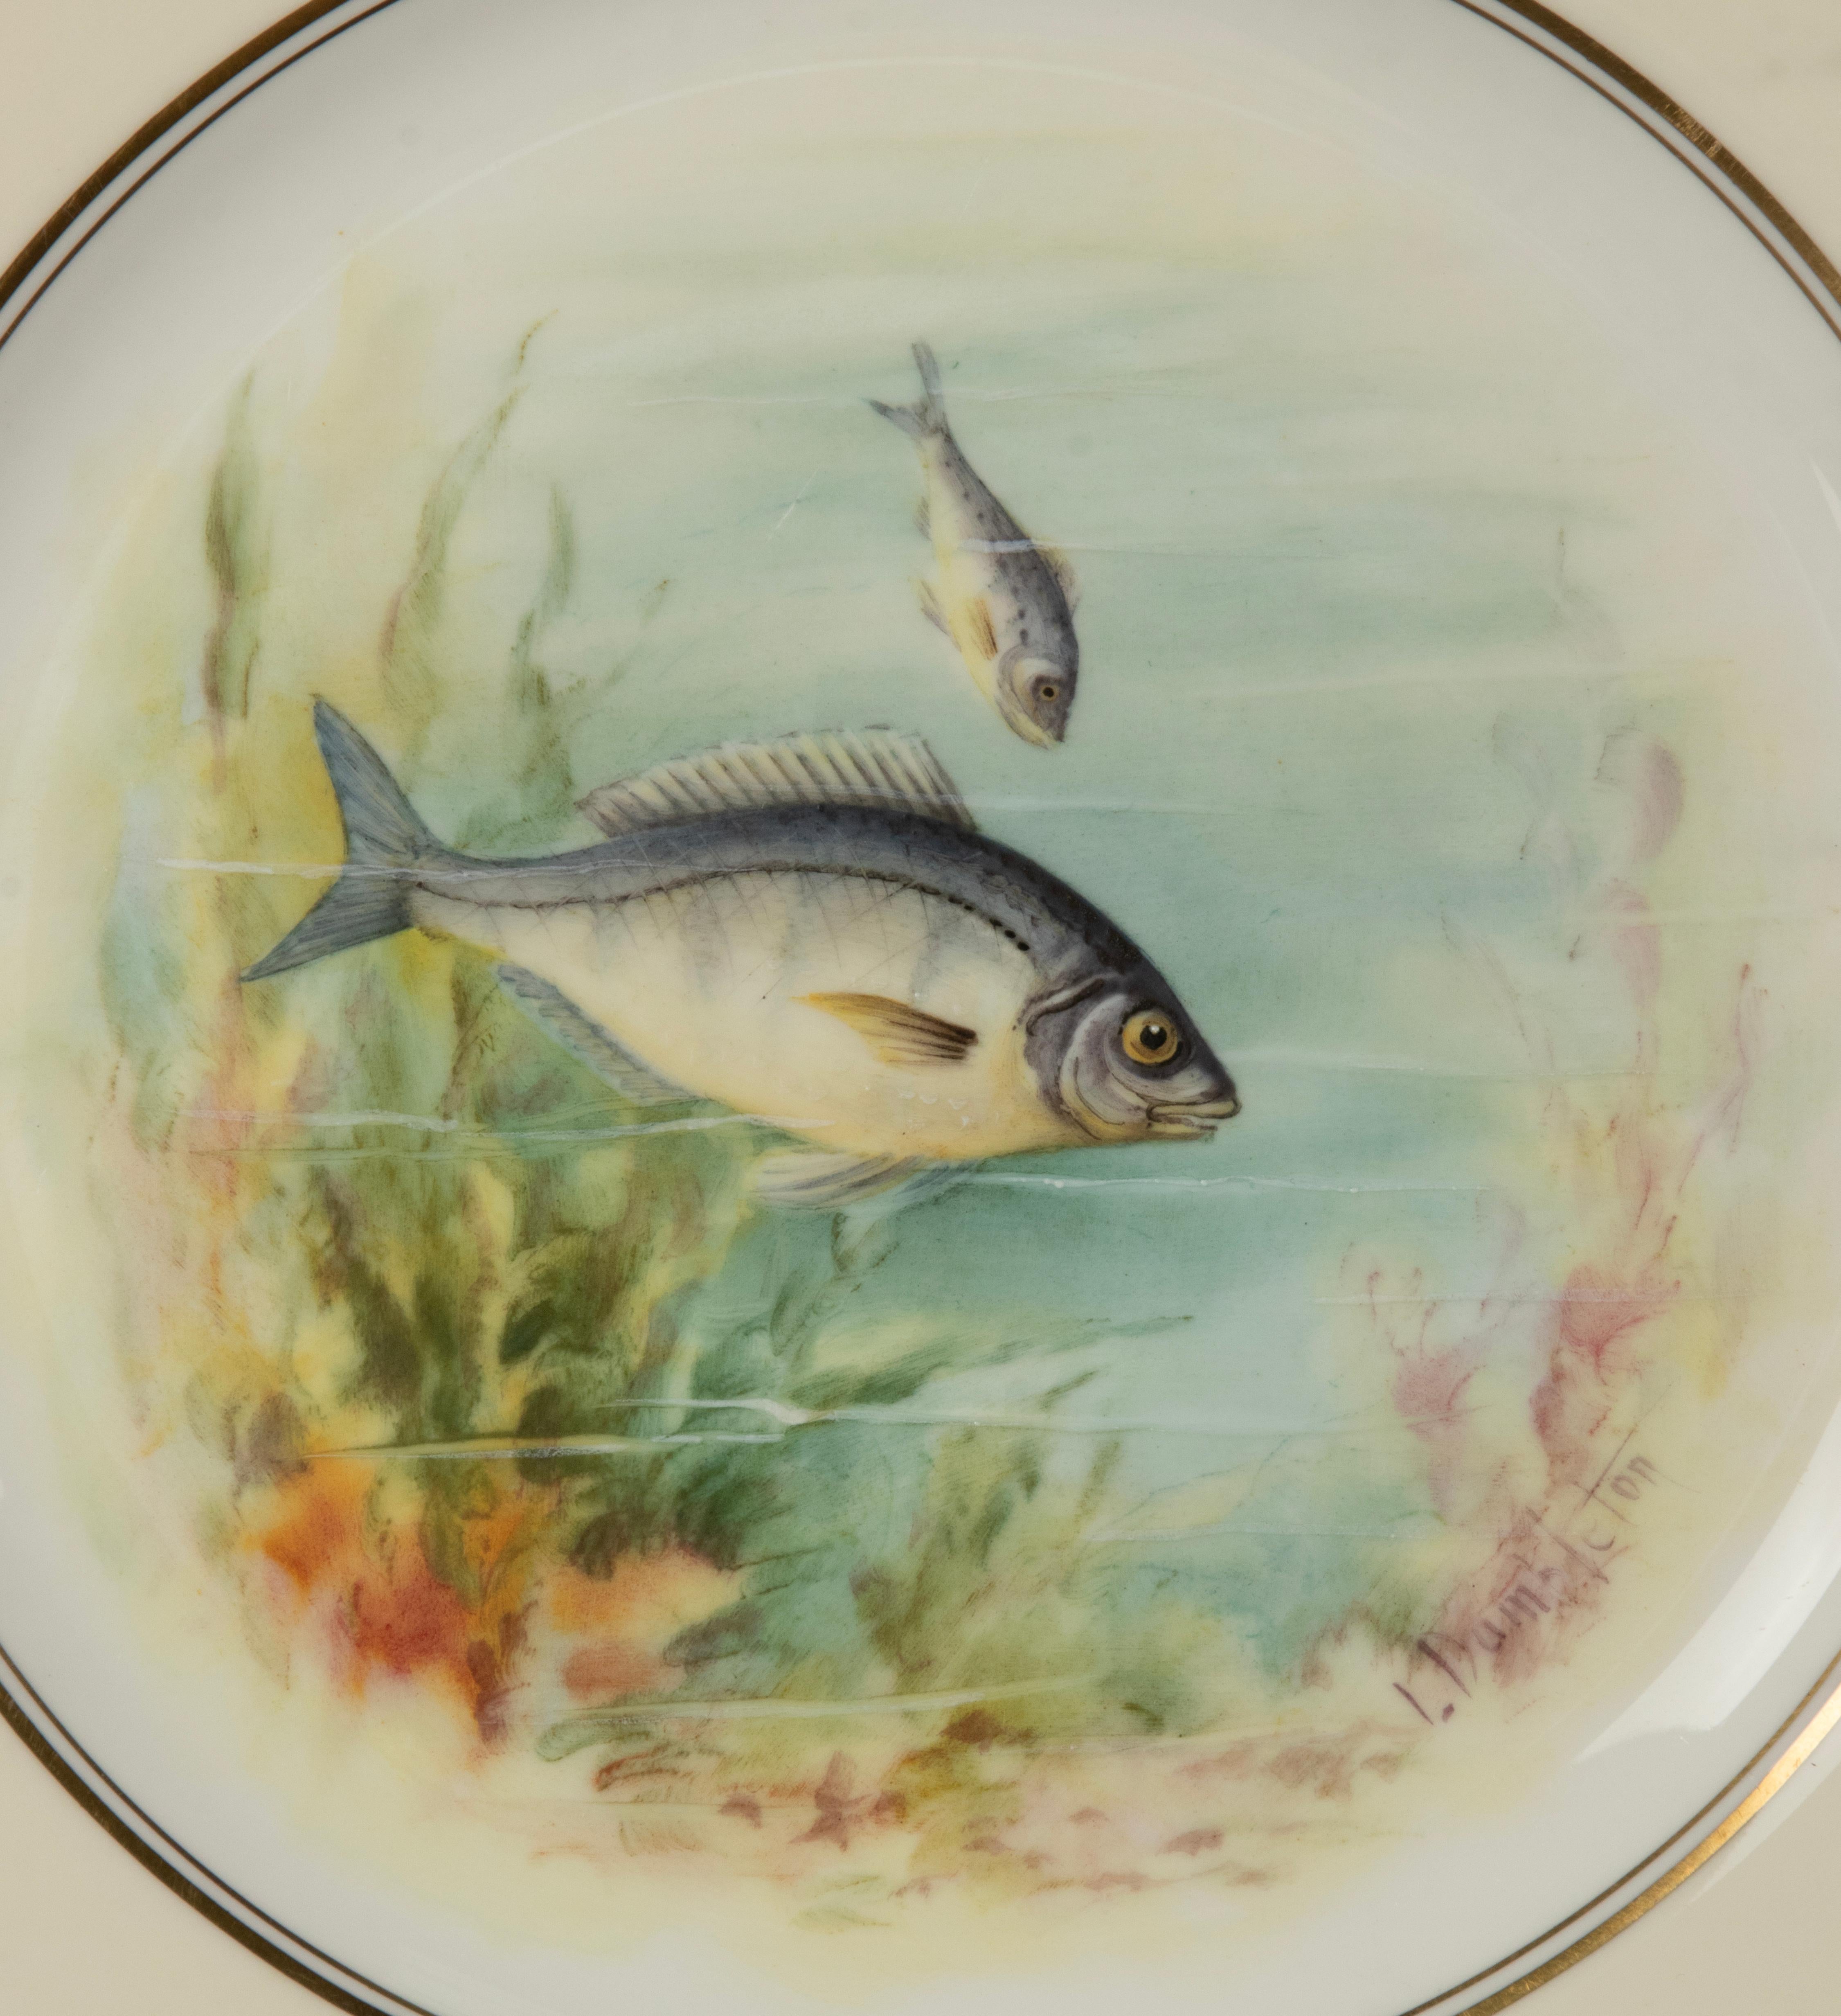 Set of 6 Porcelain Fish Plates - Minton - Hand Painted  In Good Condition For Sale In Casteren, Noord-Brabant